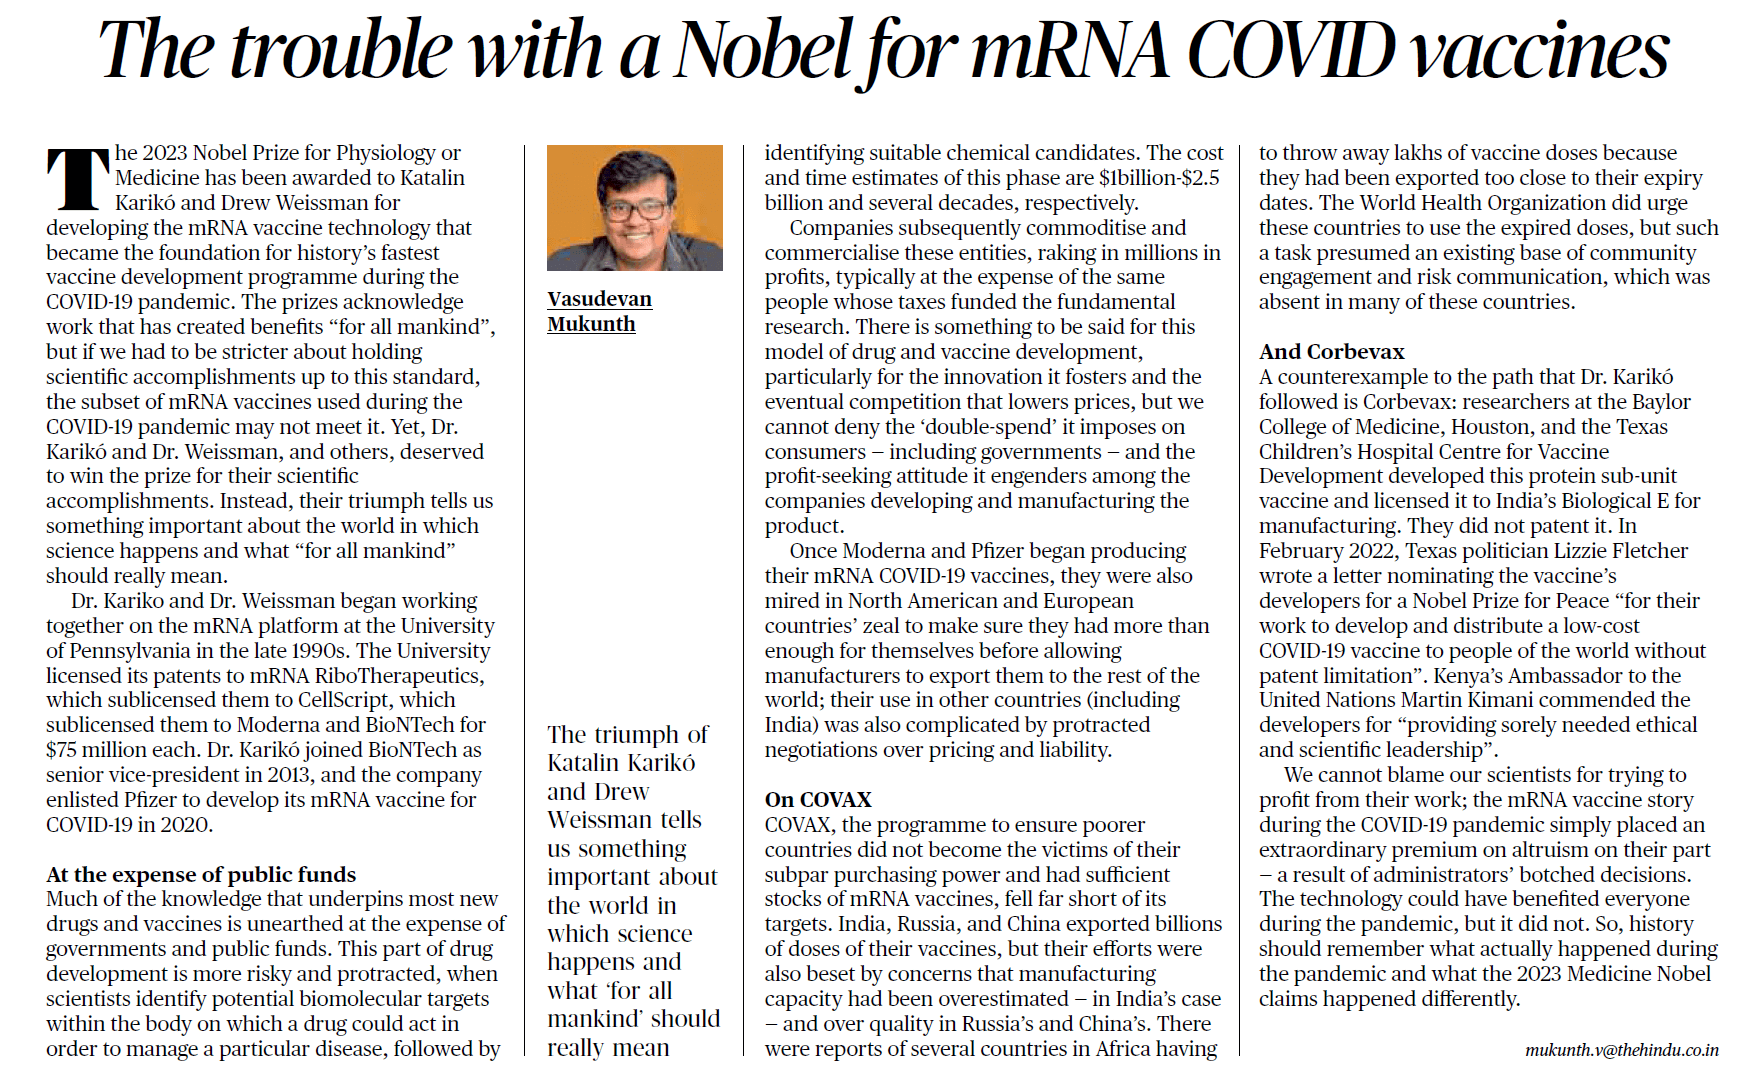 The trouble with a Nobel for mRNA COVID vaccines